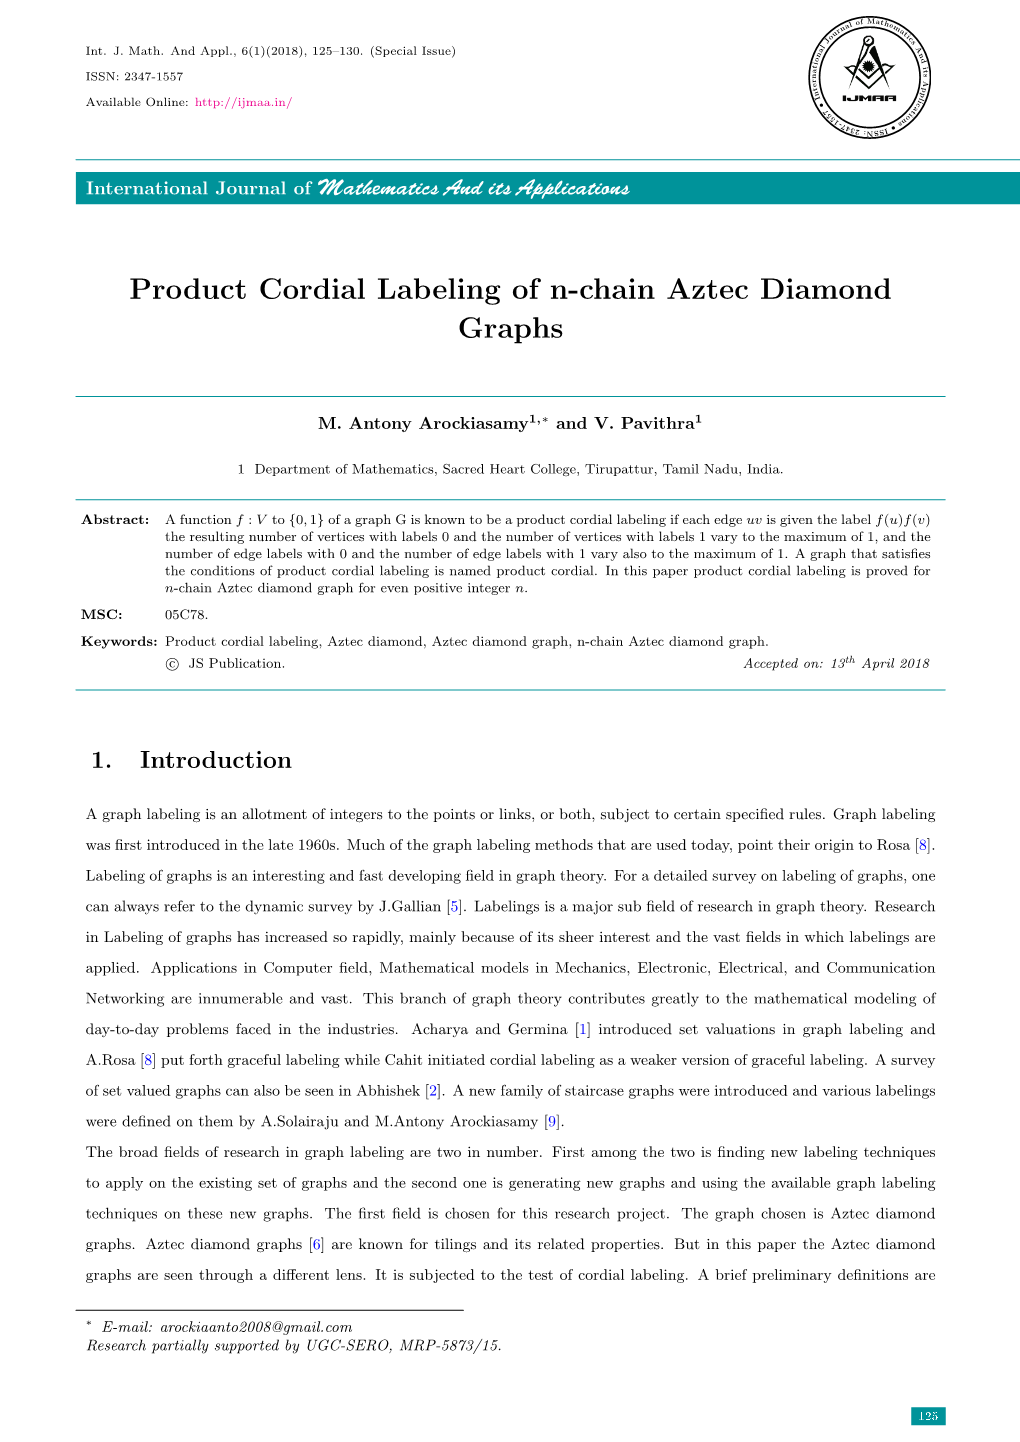 Product Cordial Labeling of N-Chain Aztec Diamond Graphs